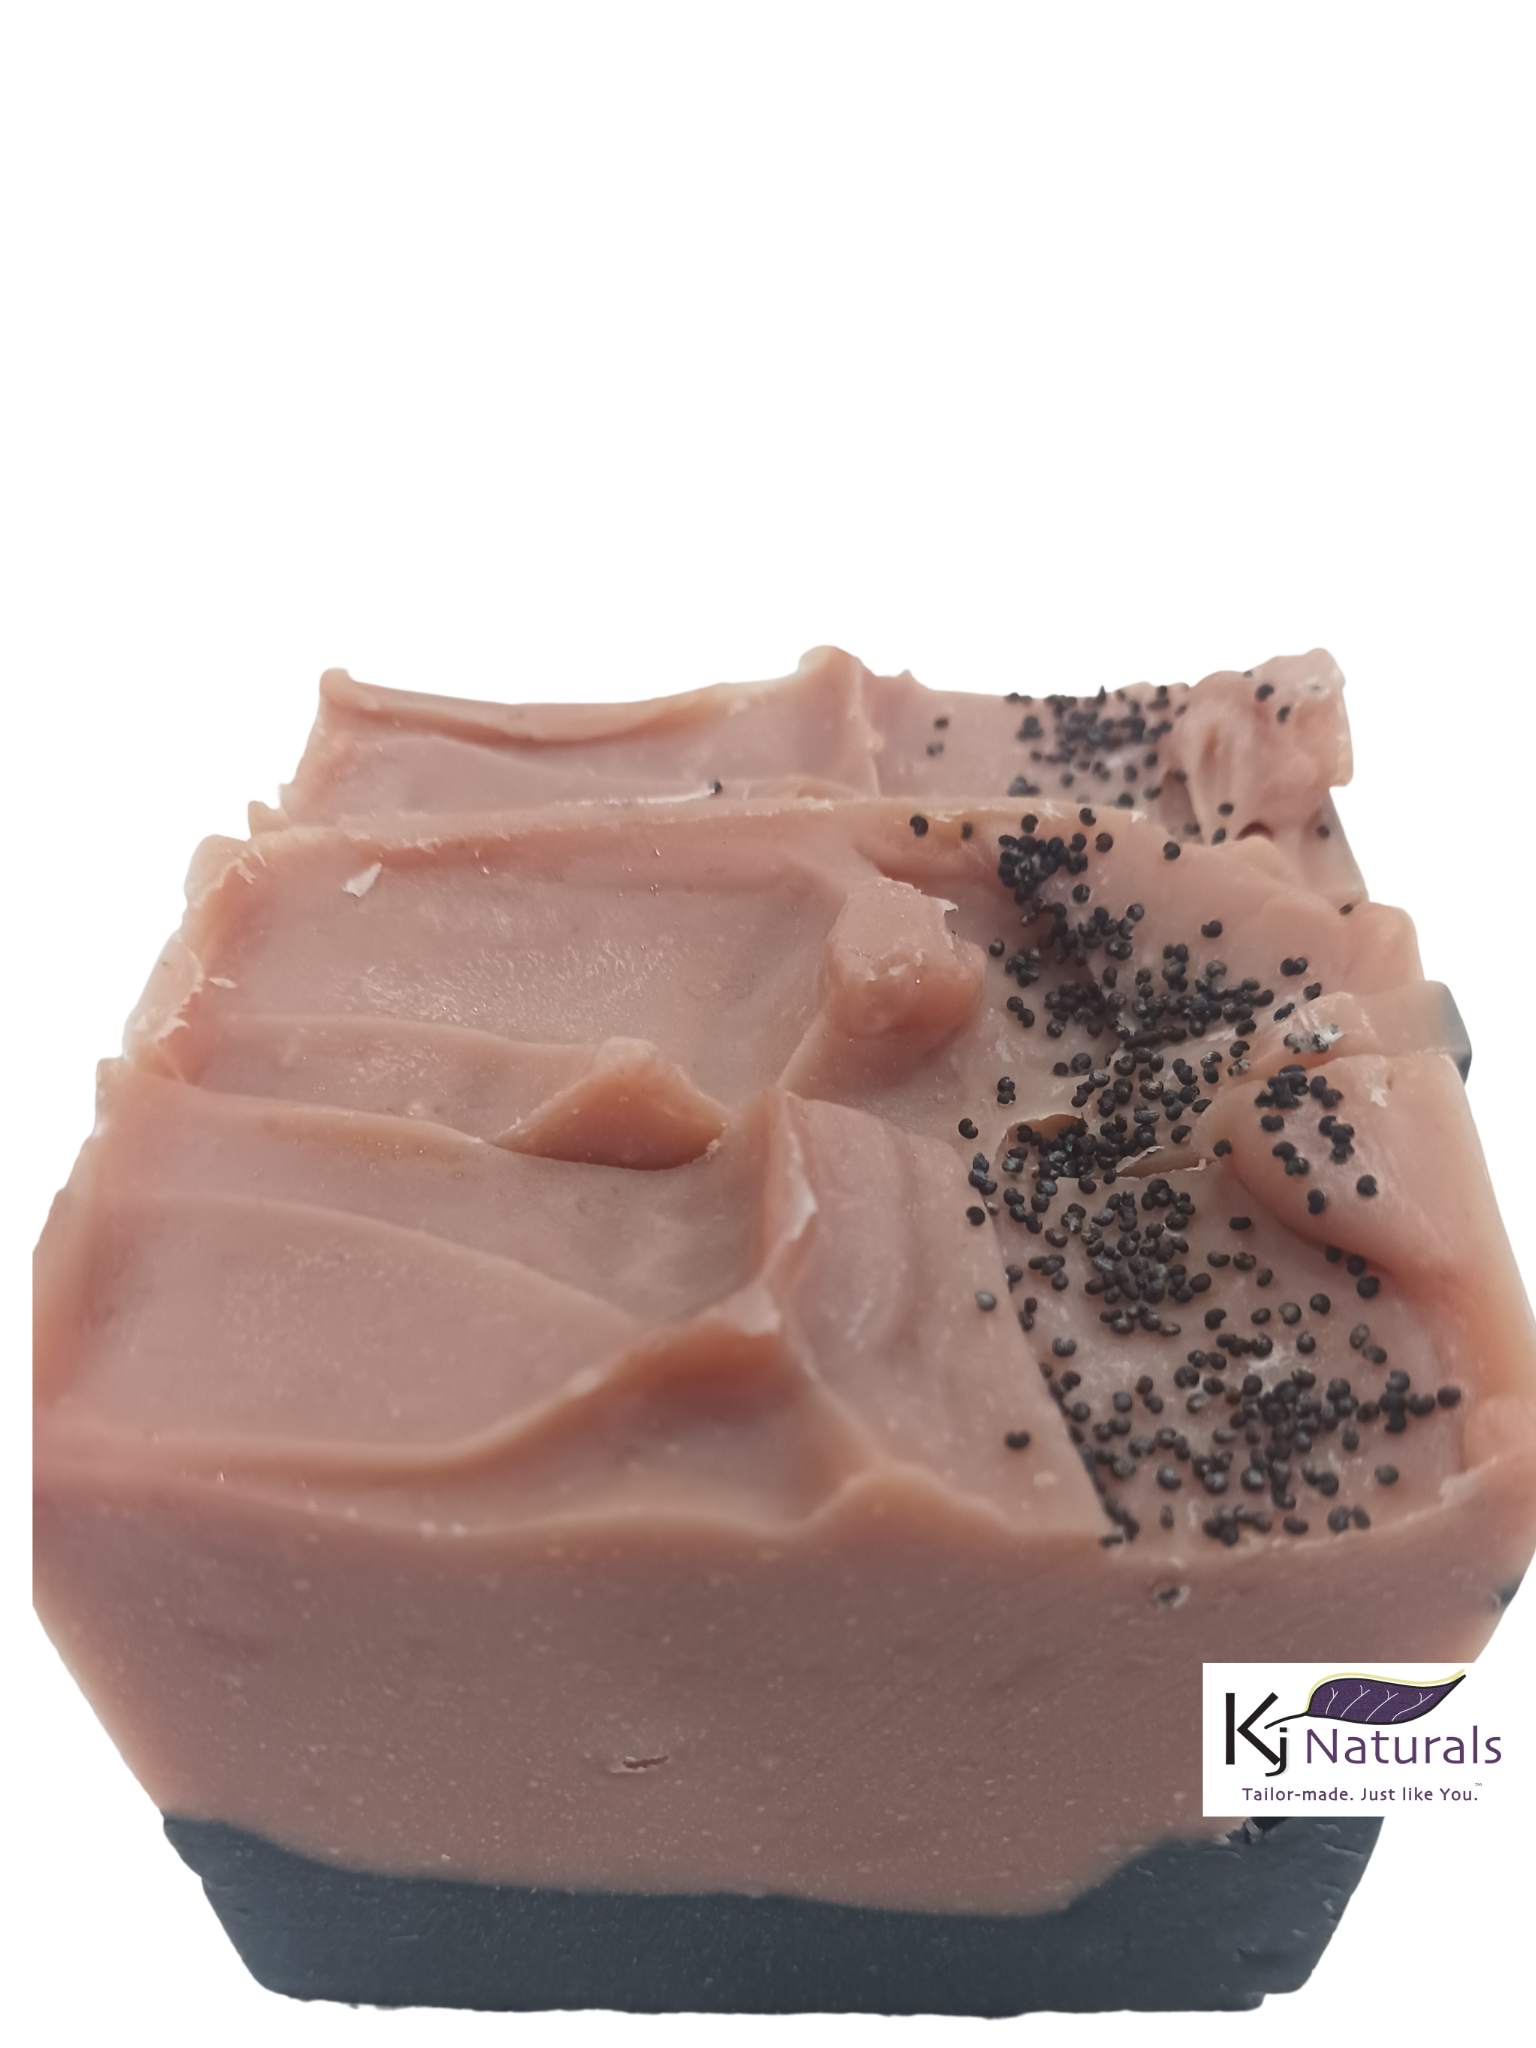 Rose Clay & Charcoal Facial Bar- Passionfruit Rose Scent